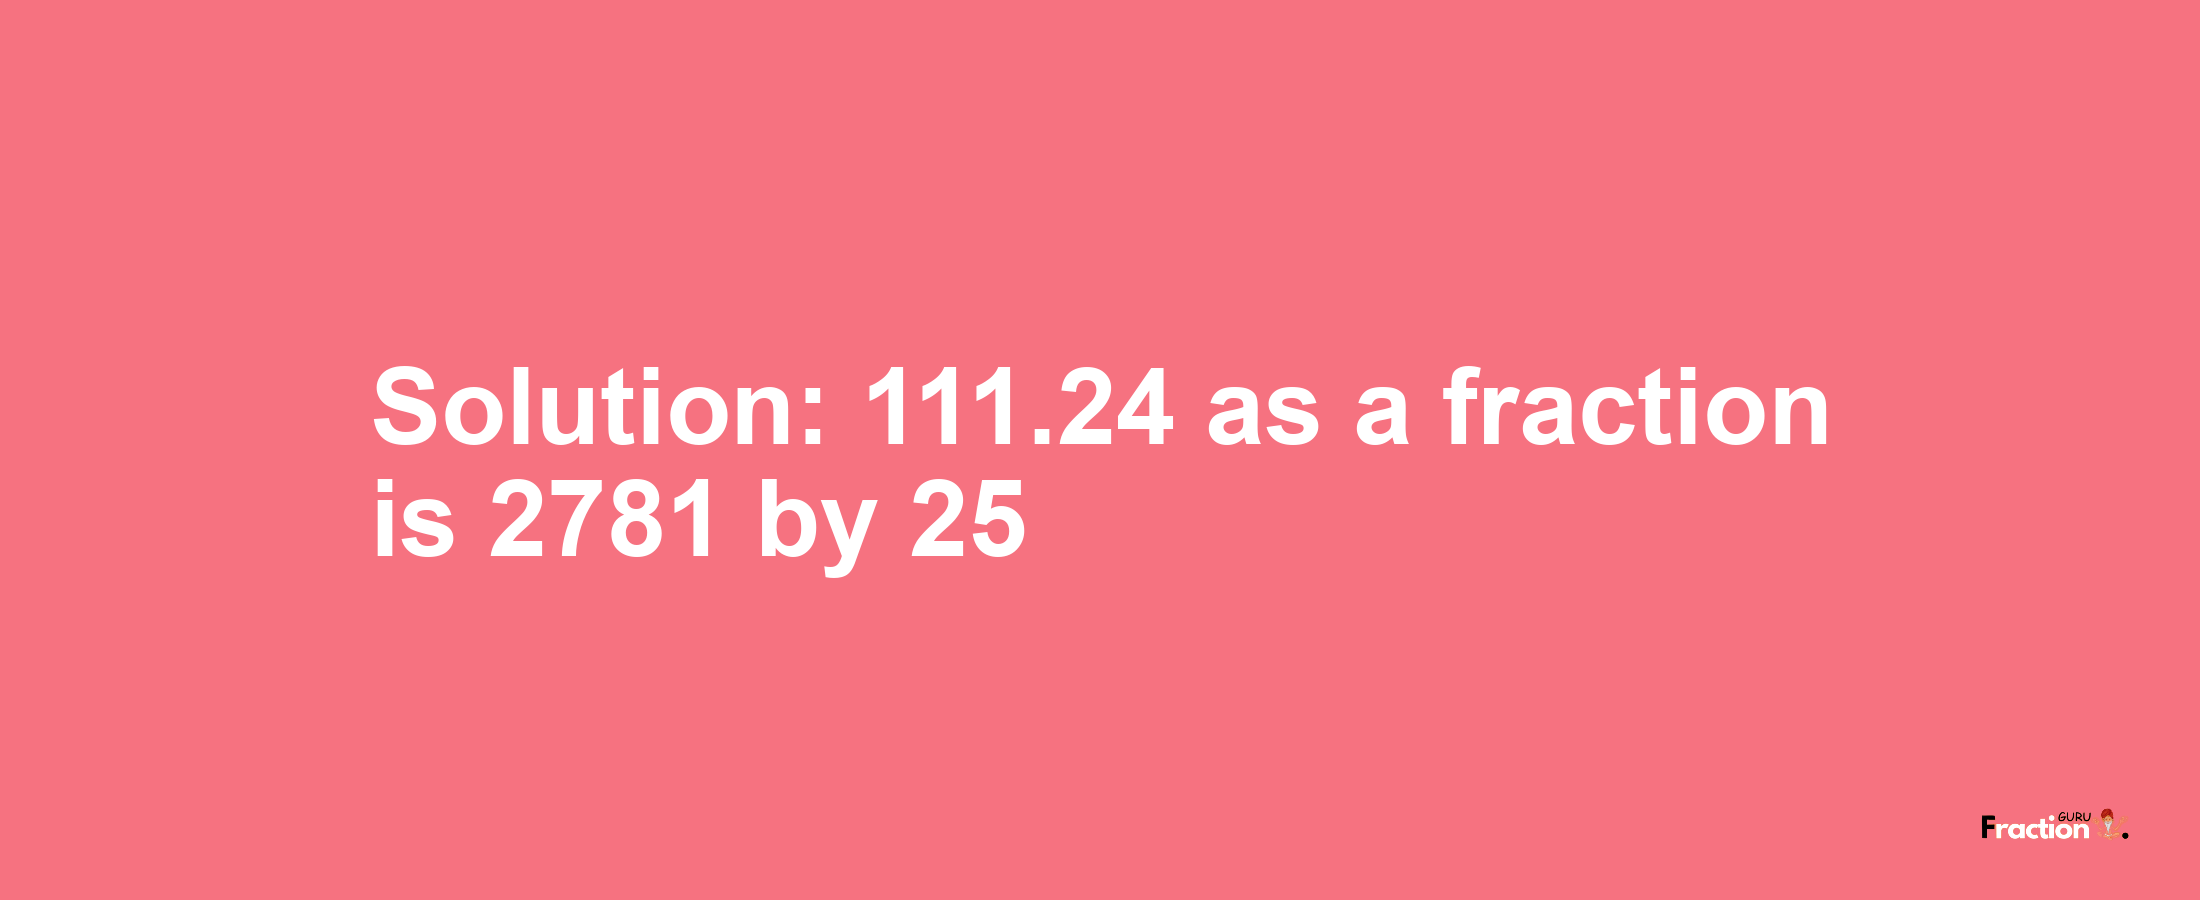 Solution:111.24 as a fraction is 2781/25